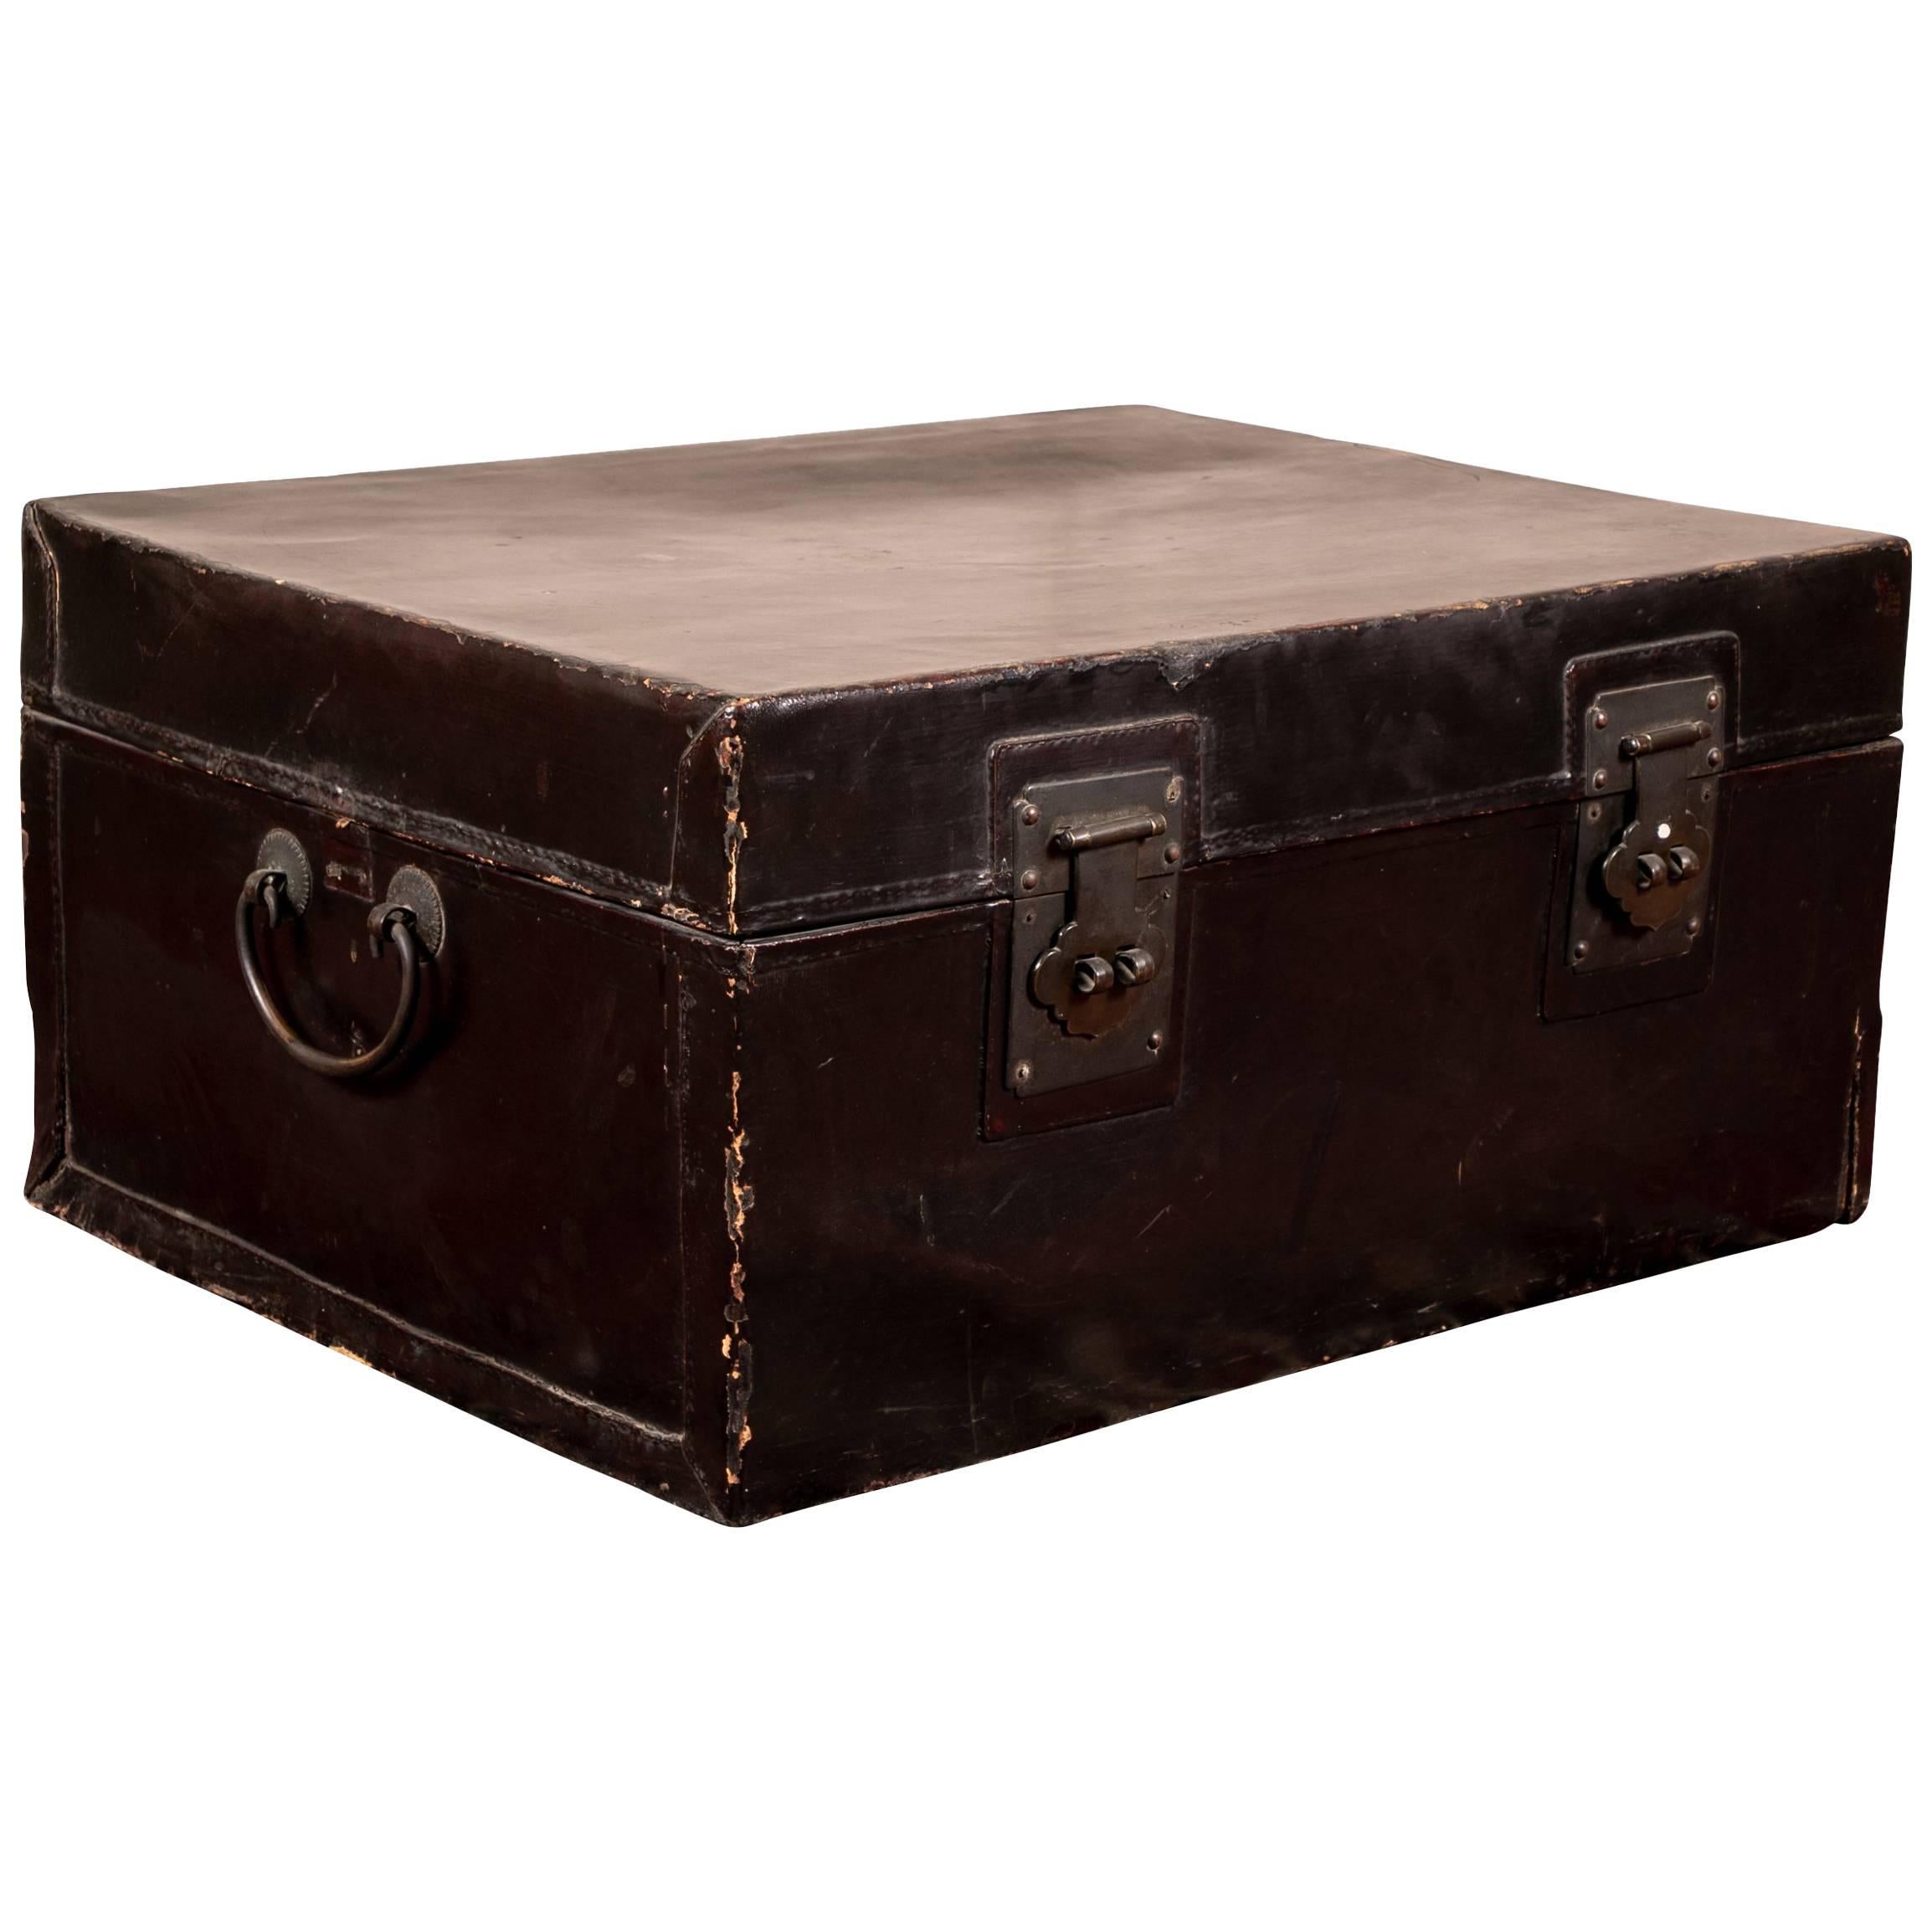 Antique Chinese Double Lock Trunk as a Coffee Table